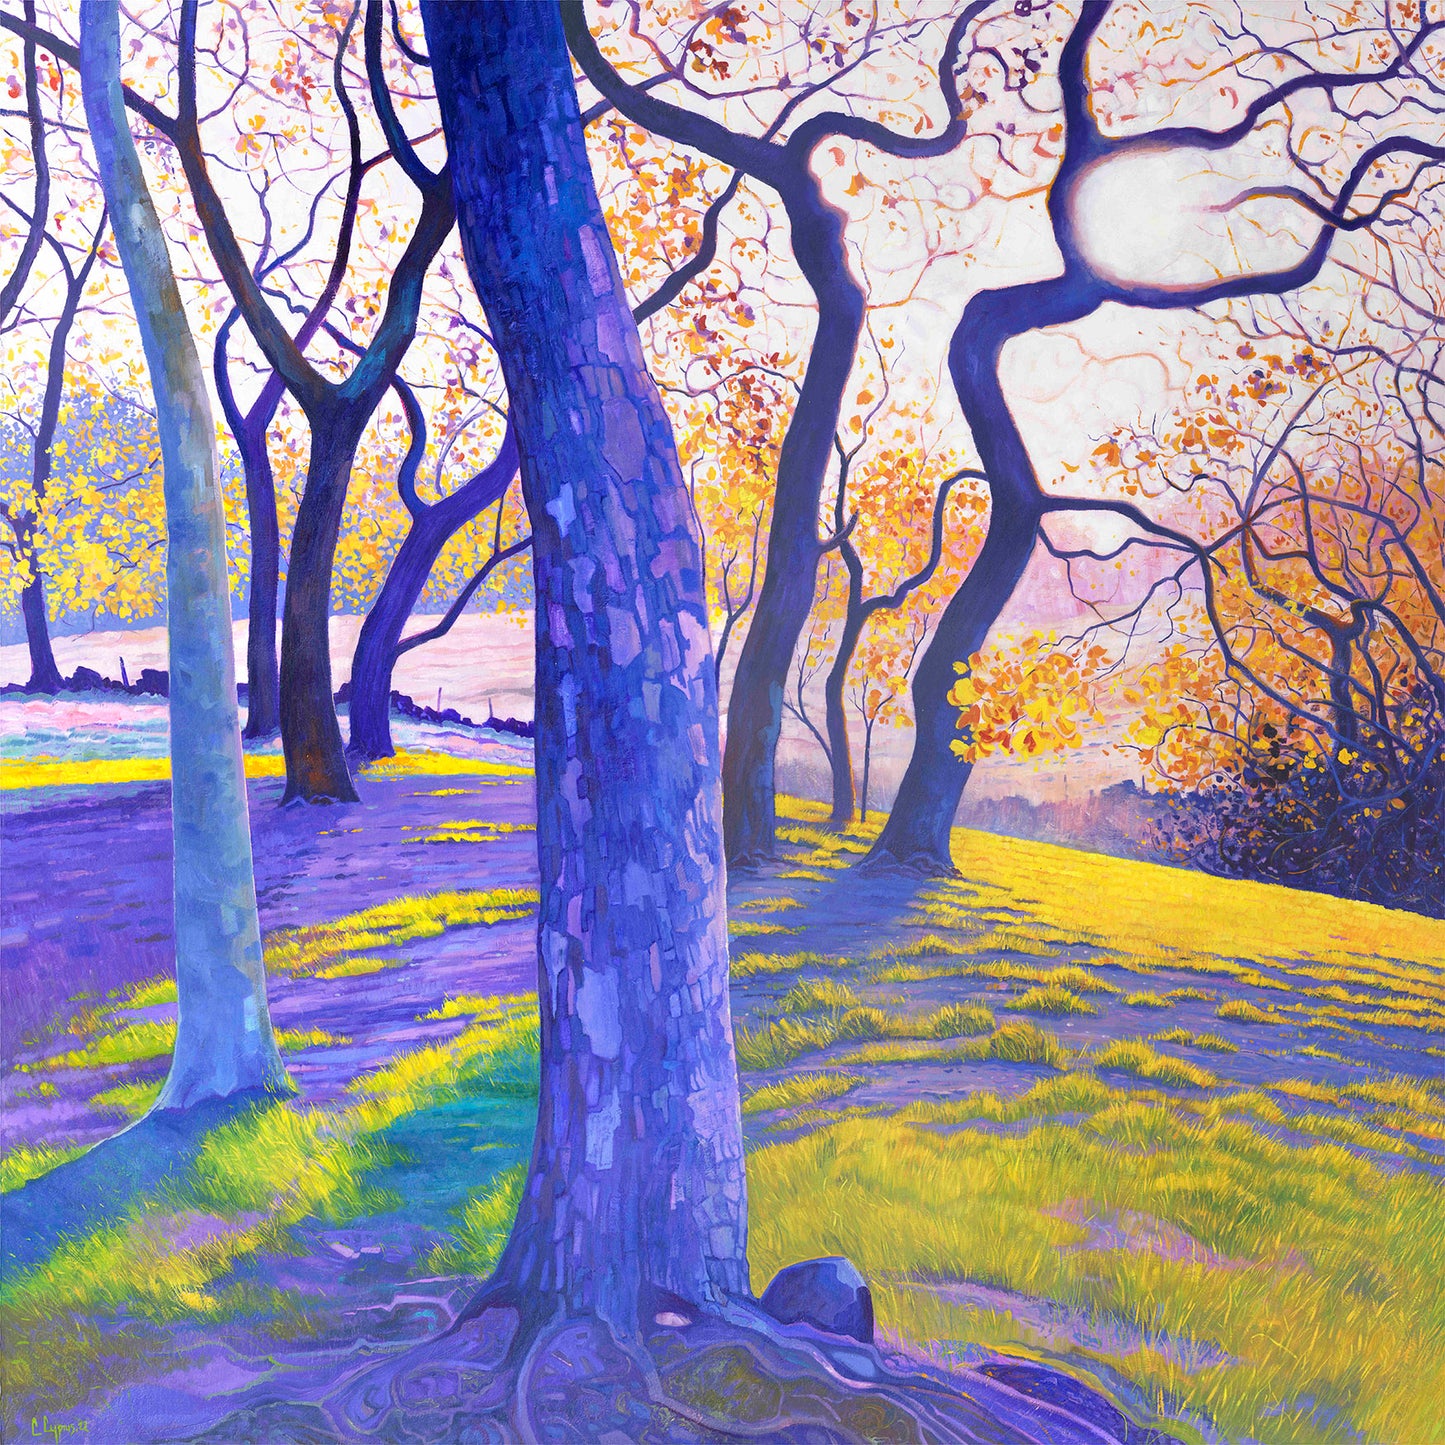 Limited Edition Gicleé Print  Reproduced from the 'Dream Trees' series of oil painting  The painting 'New Dawn' invites you to take a moment to pause, to breathe, and to appreciate the beauty that surrounds us. It serves as a gentle reminder to embrace the present moment, to find solace in the ever-changing cycle of life, and to seek harmony between ourselves and the world in which we reside.  Actual size of artwork: 55cm x 55cm 